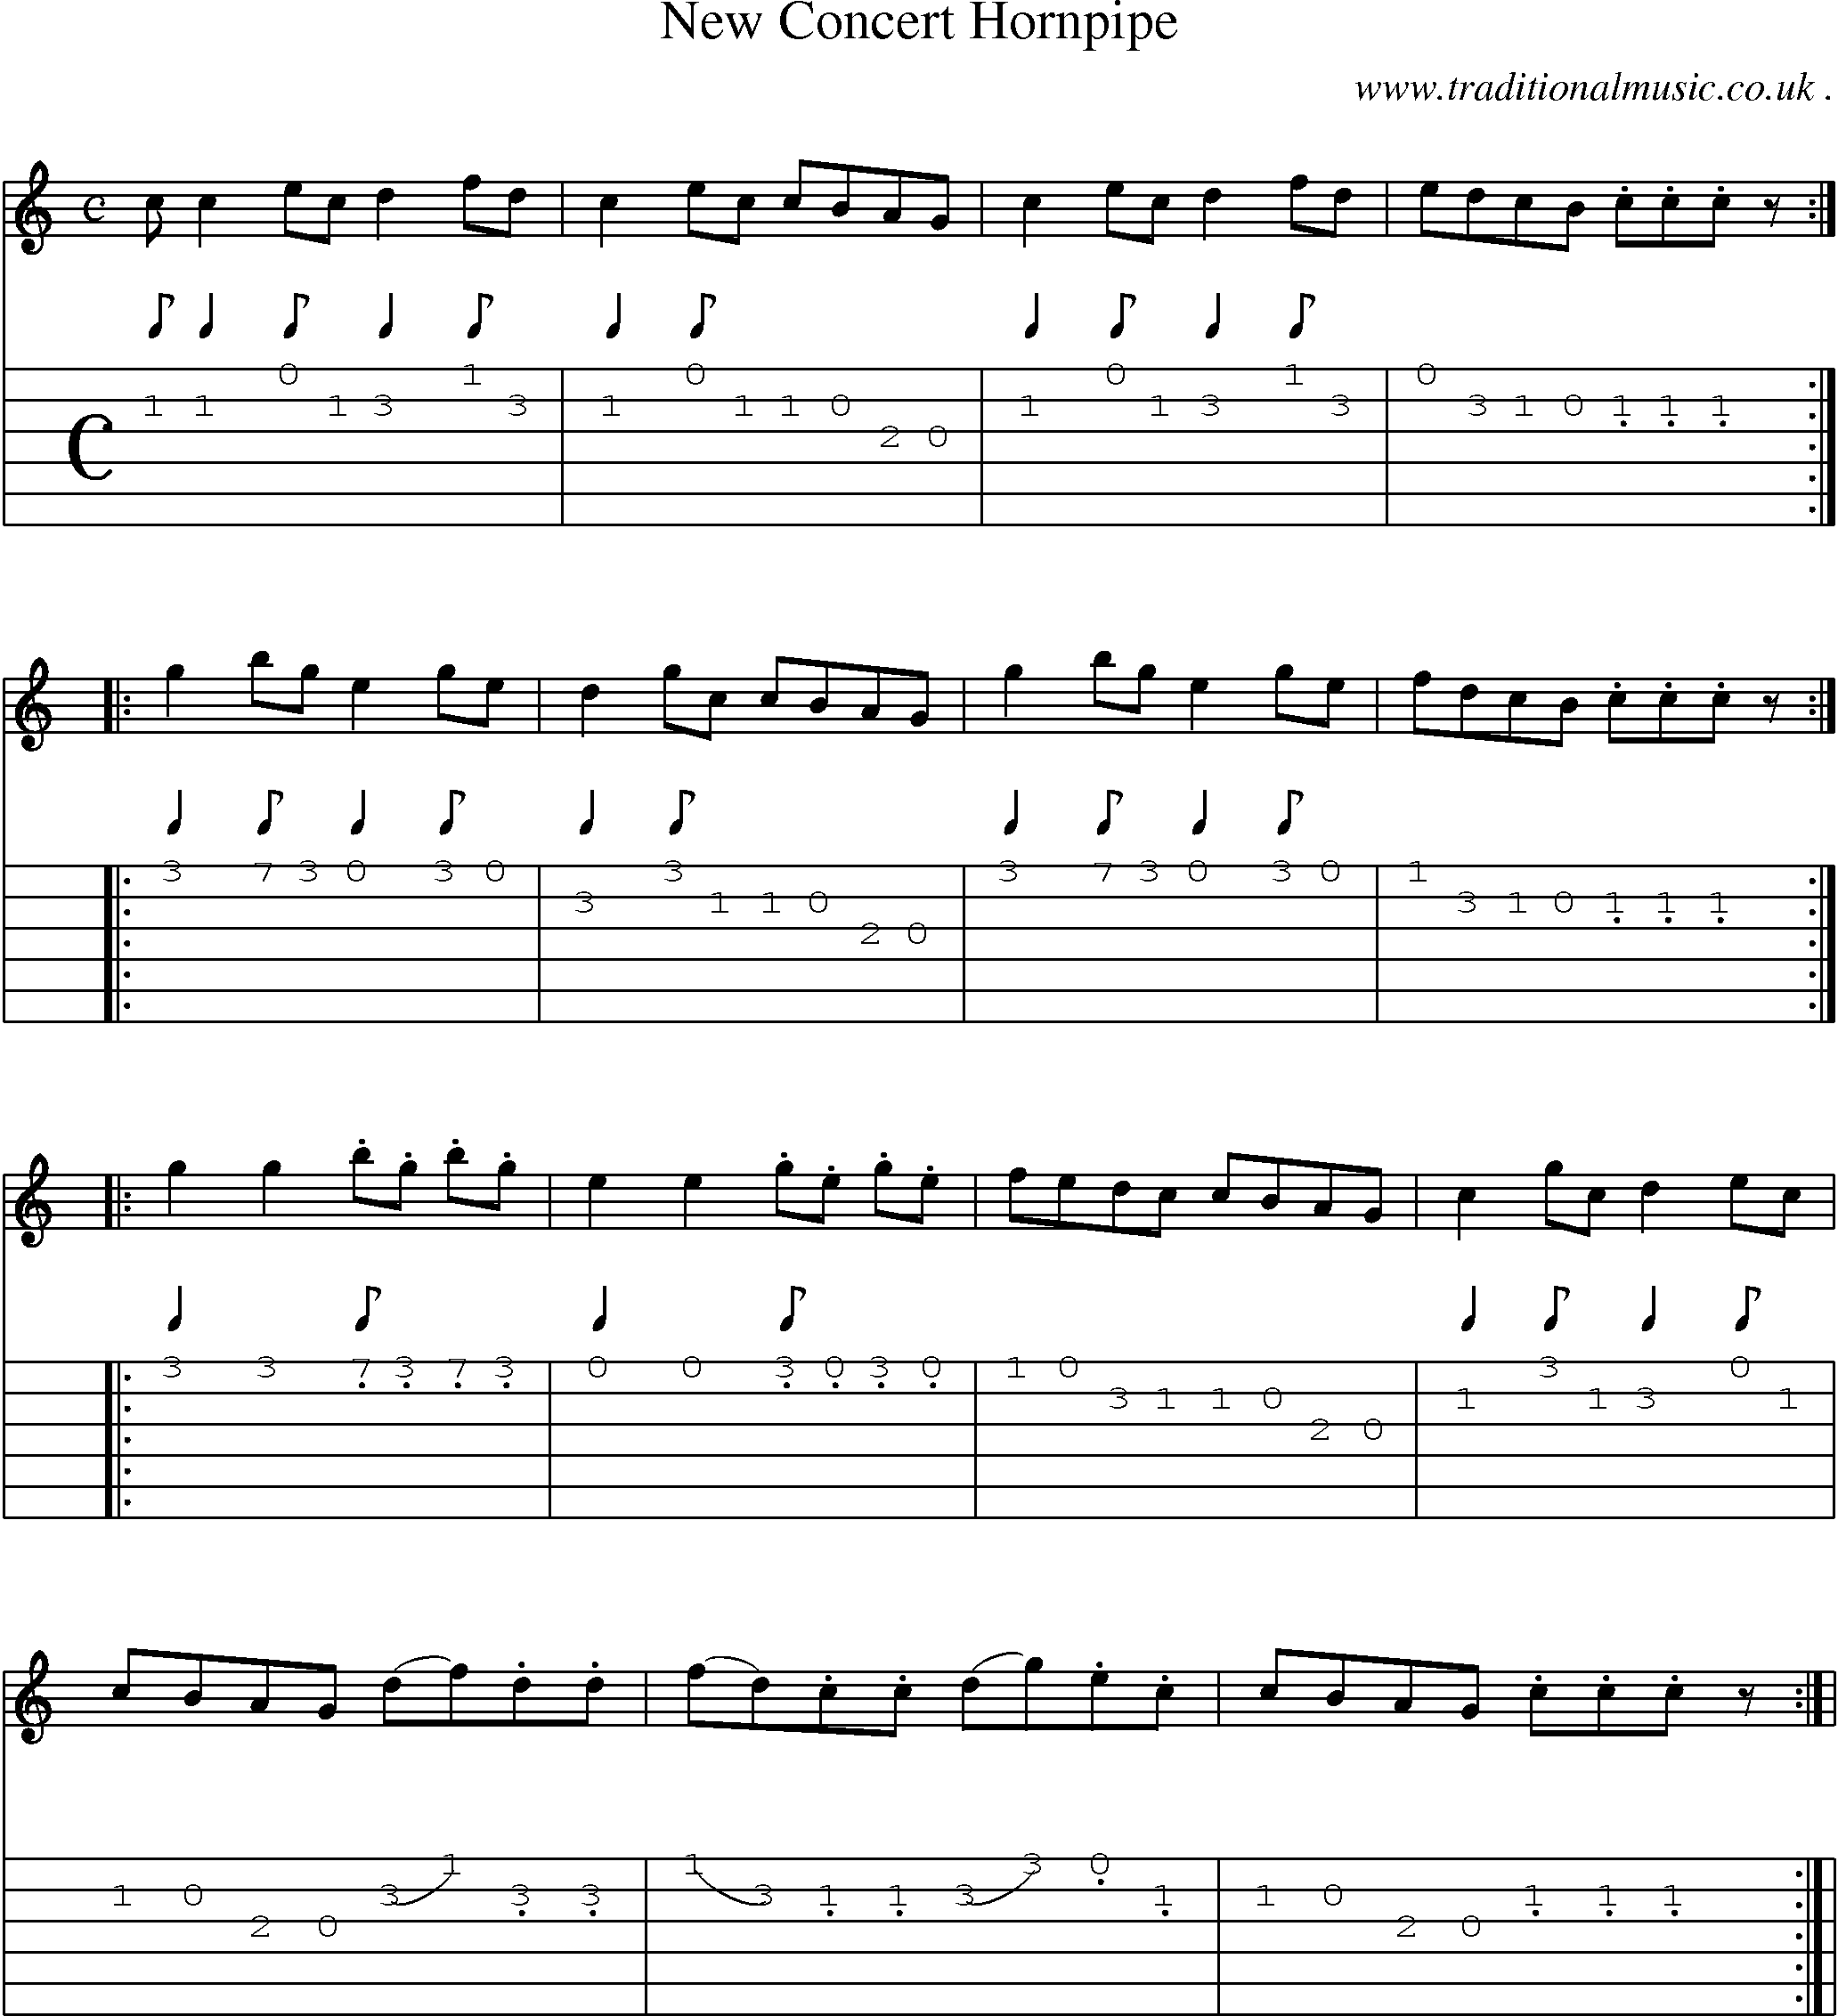 Sheet-Music and Guitar Tabs for New Concert Hornpipe